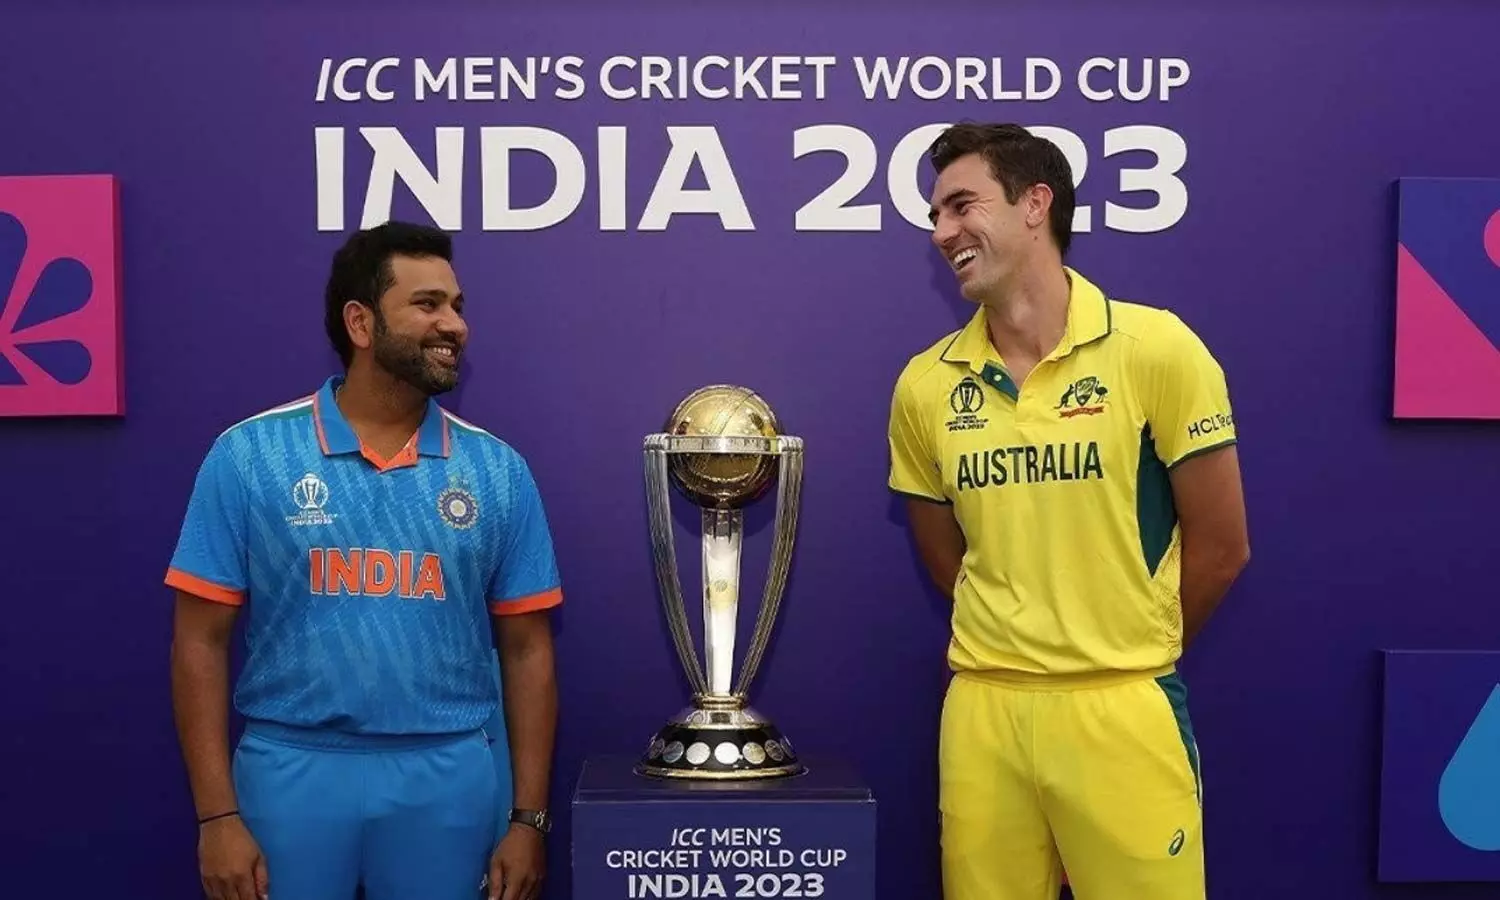 ICC World Cup 2023: Chennai gears up for the big battle between India and Australia